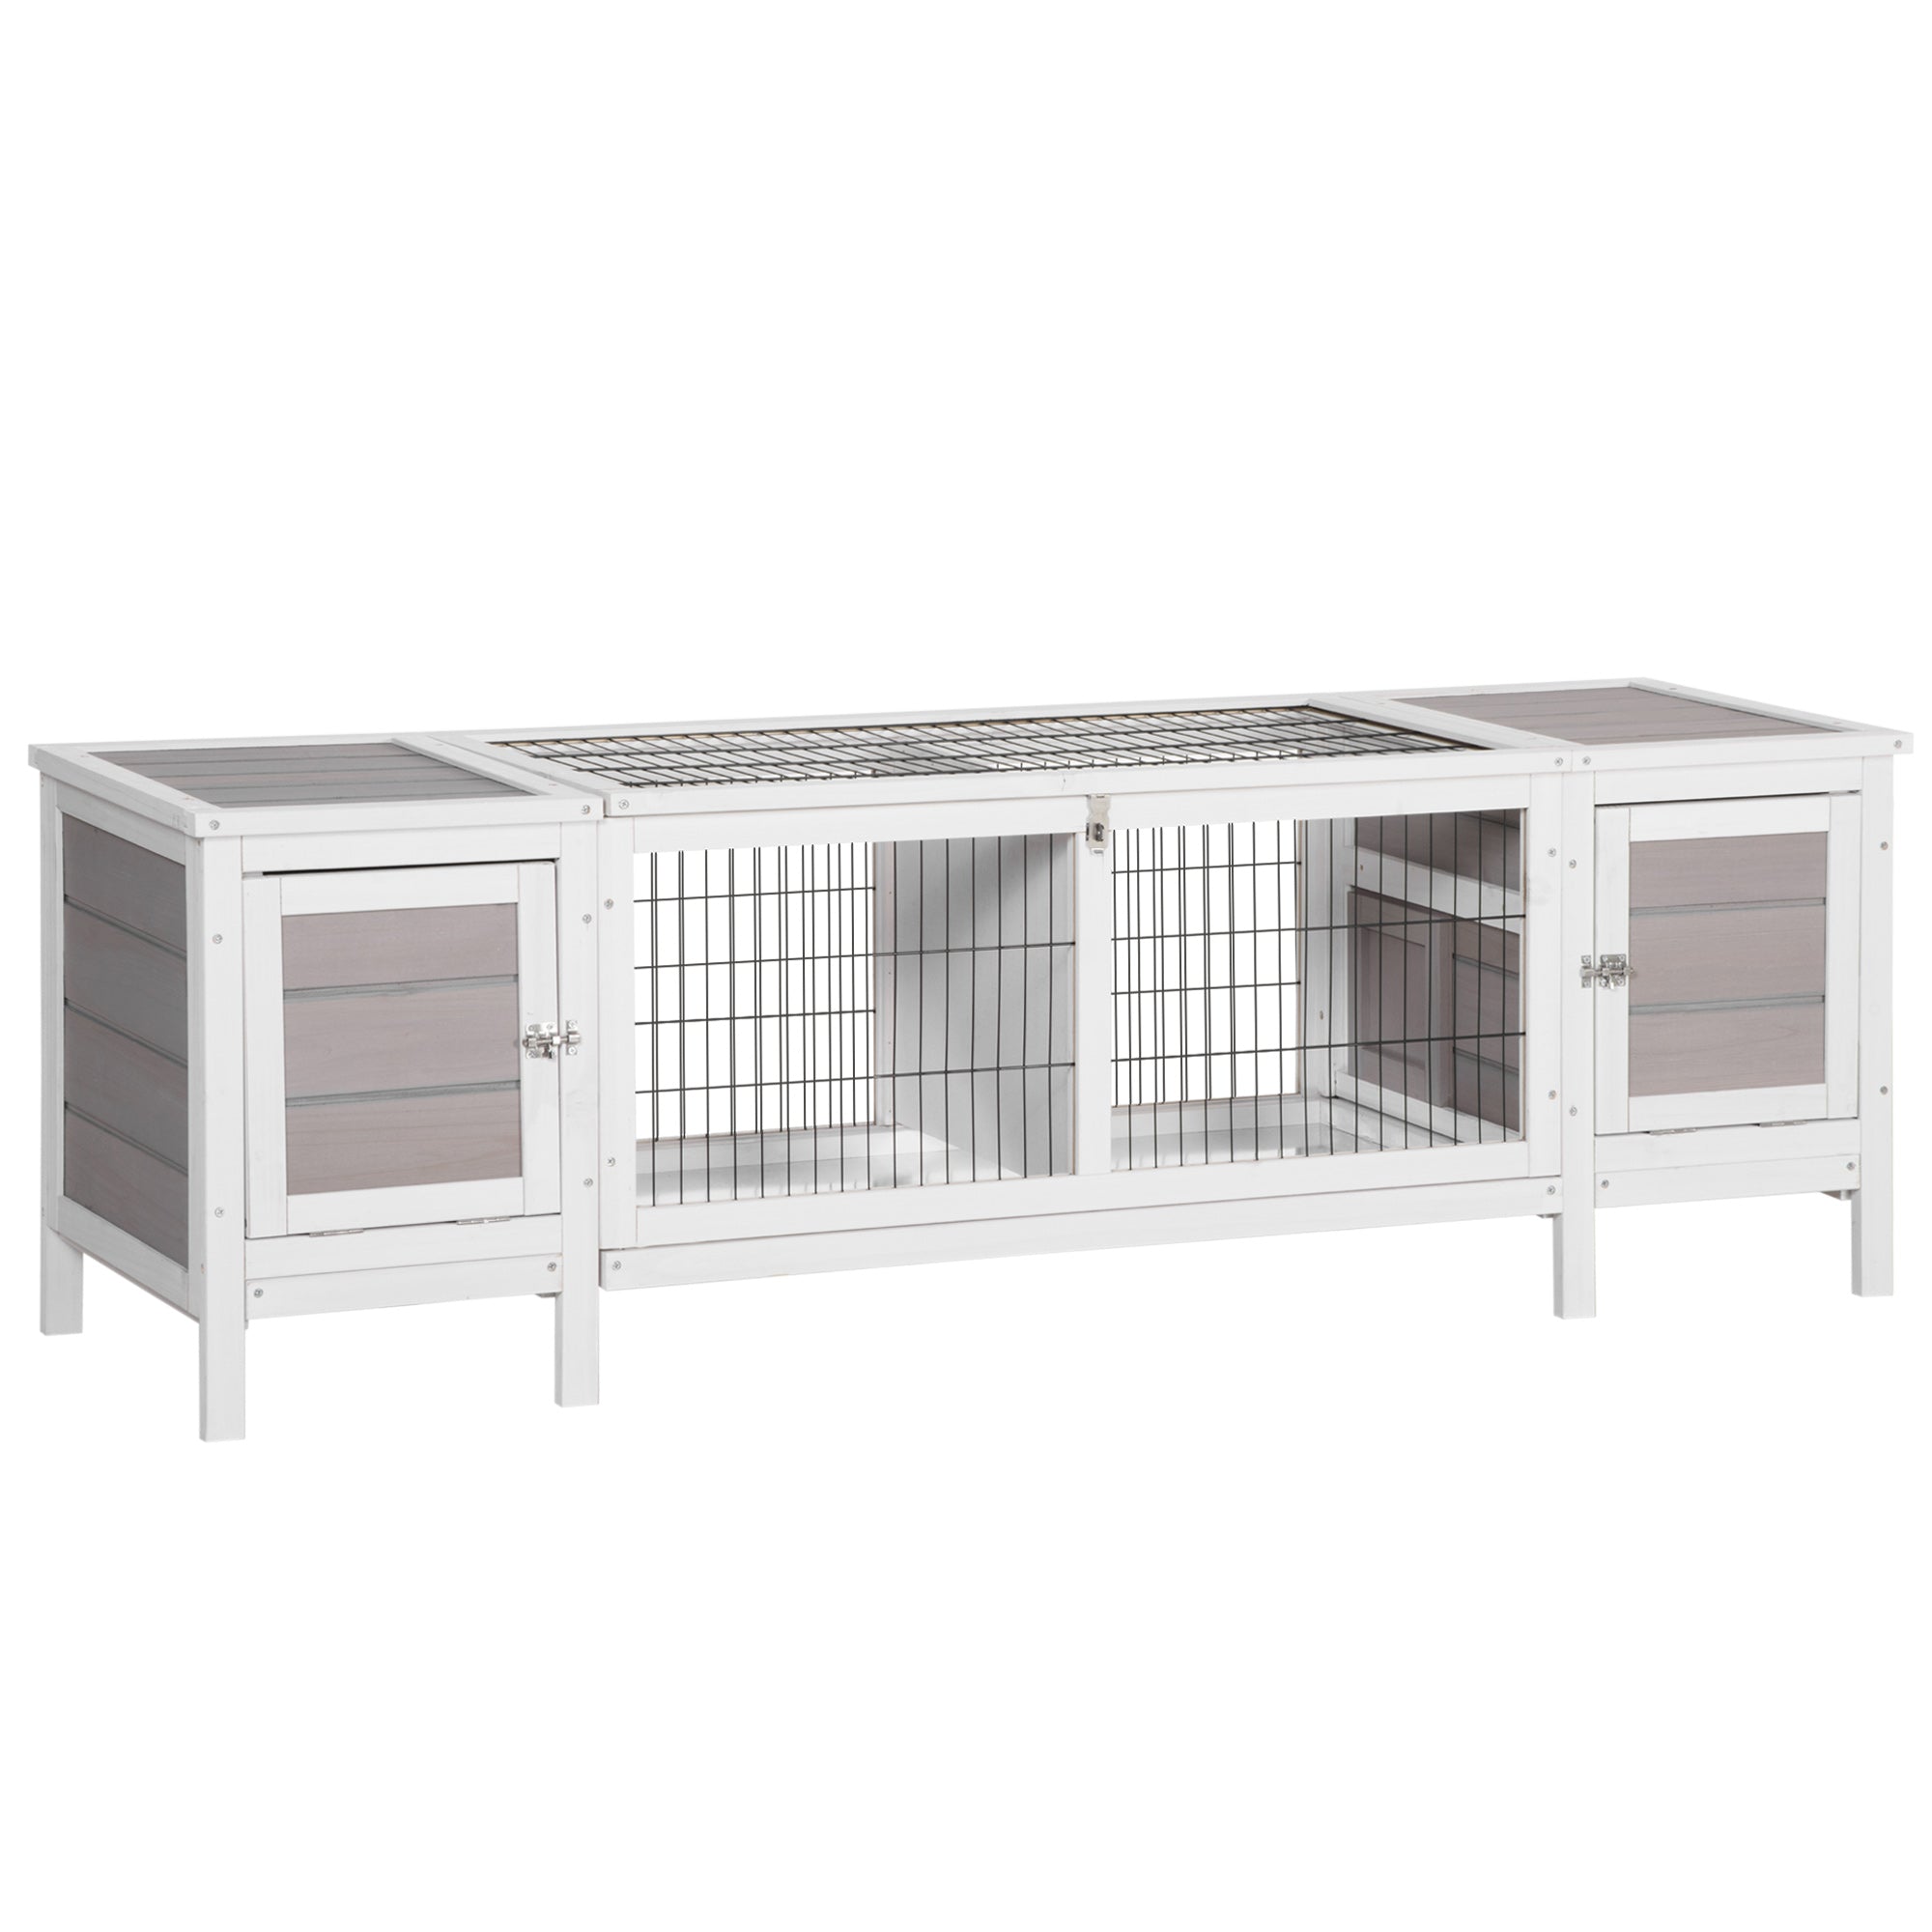 Wooden Rabbit Hutch, Guinea Pig Cage, Separable Bunny Run, Small Animal House for Indoor with Slide-out Tray, 161 x 50.5 x 53.3cm, Grey, PawHut,